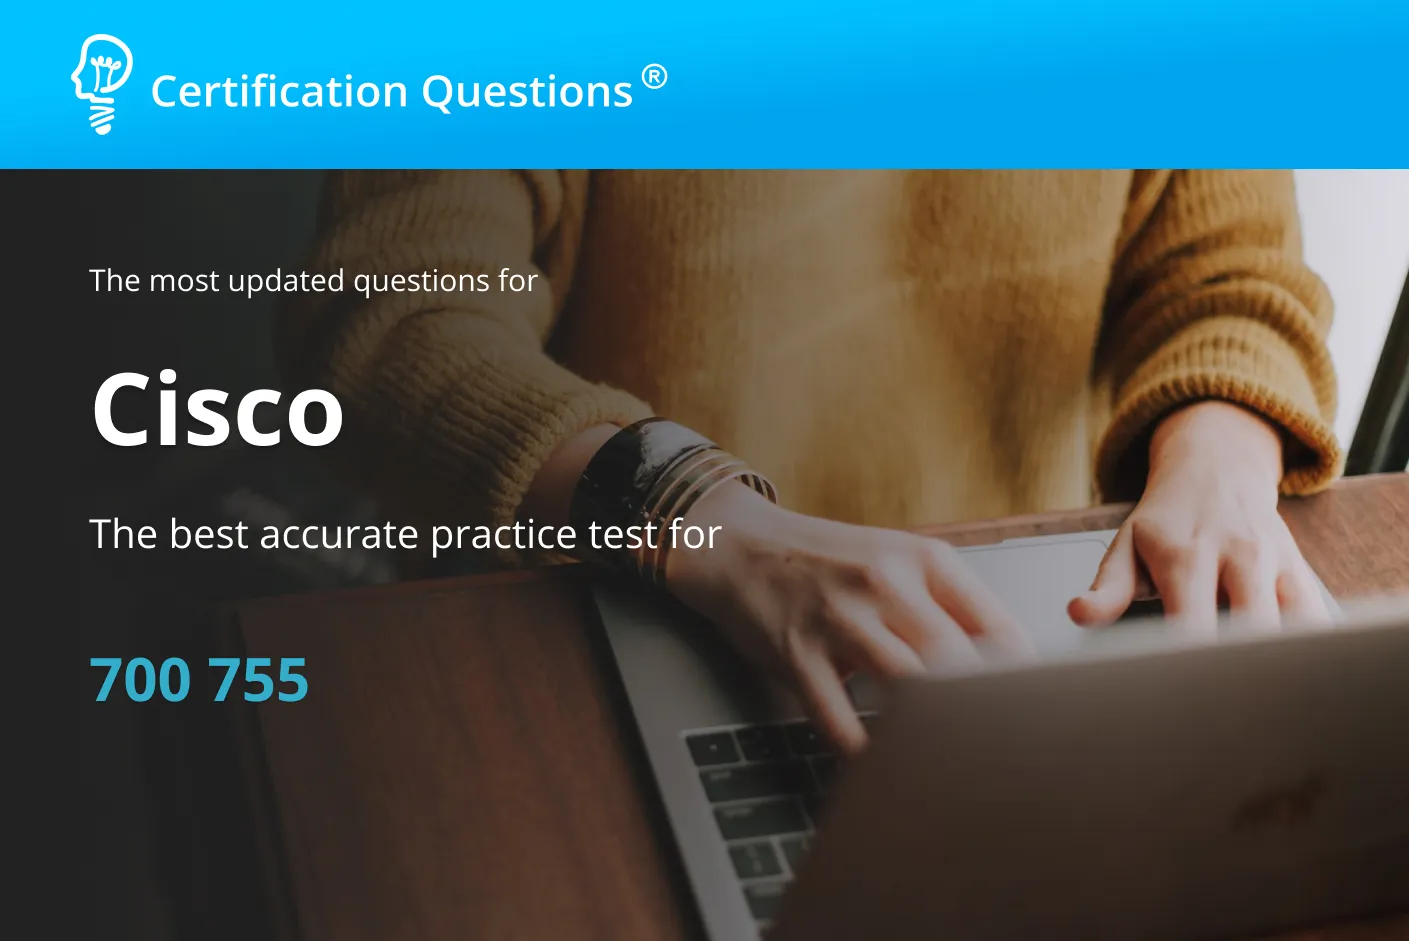 This study guide is related to the Cisco 700 755 questions in the United States of America